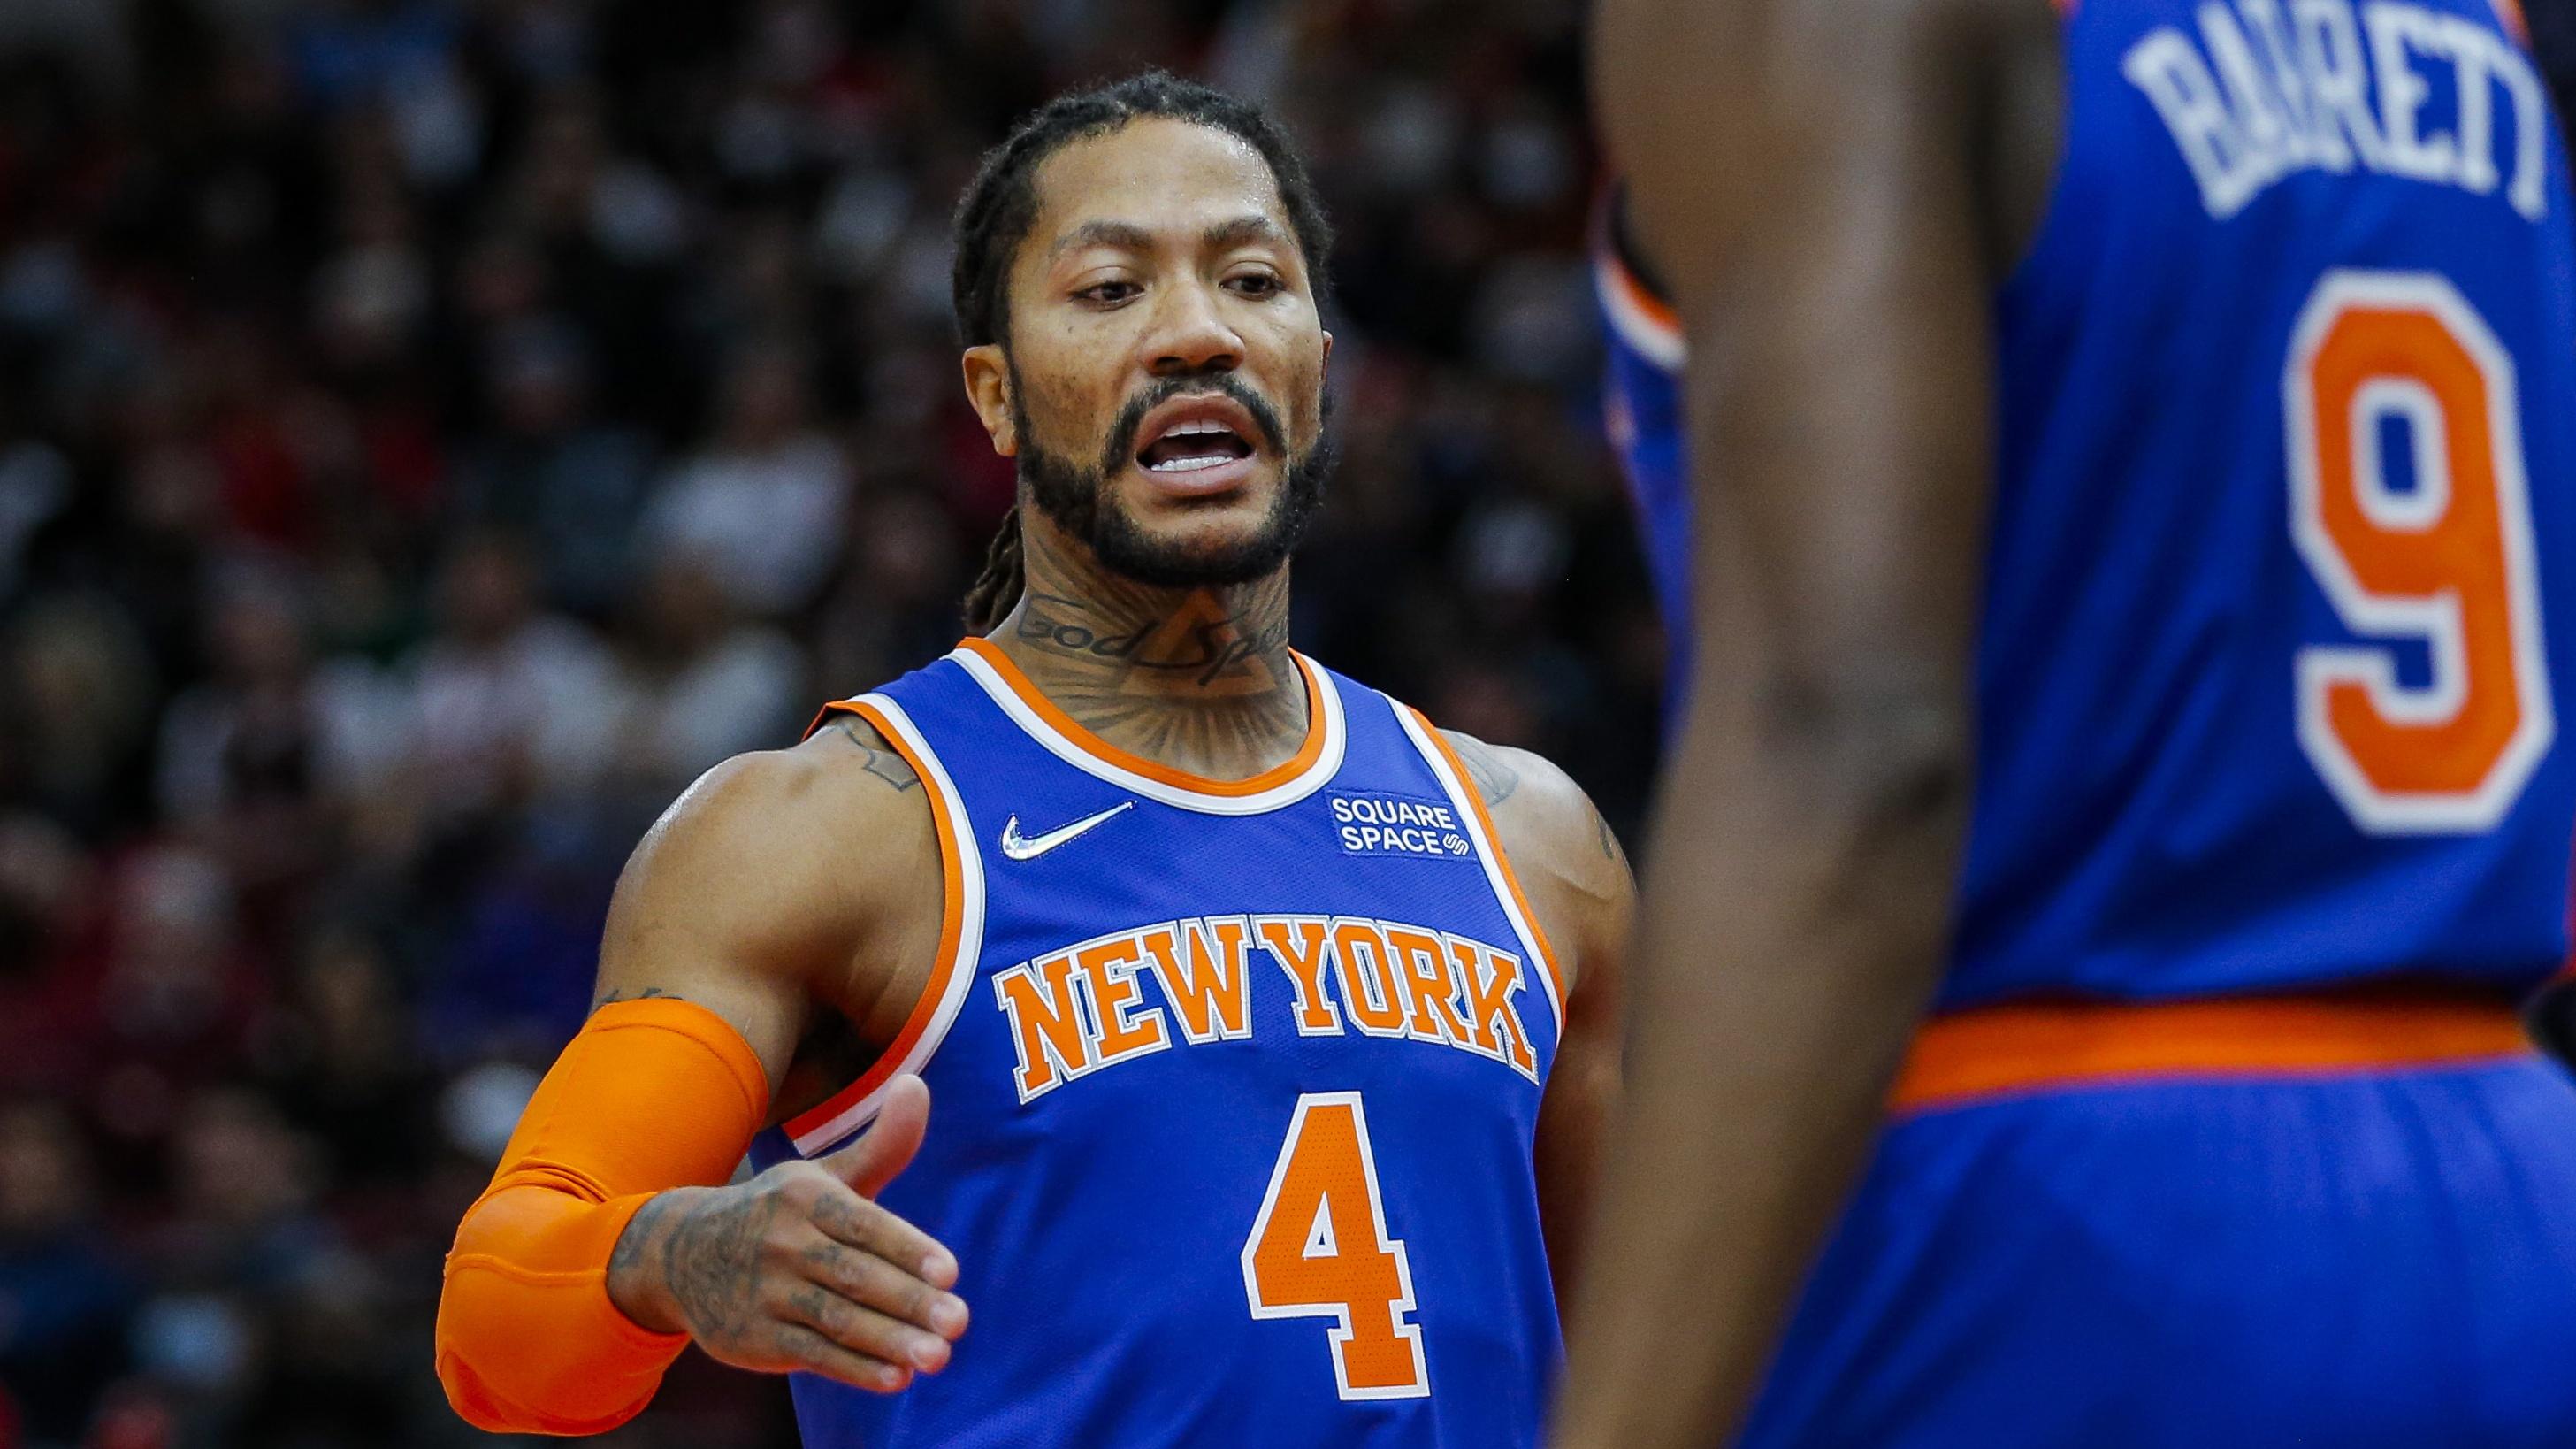 Nov 21, 2021; Chicago, Illinois, USA; New York Knicks guard Derrick Rose (4) reacts after a play against the Chicago Bulls with guard RJ Barrett (9) during the second half at United Center. The Chicago Bulls won 109-103. Mandatory Credit: Jon Durr-USA TODAY Sports / © Jon Durr-USA TODAY Sports